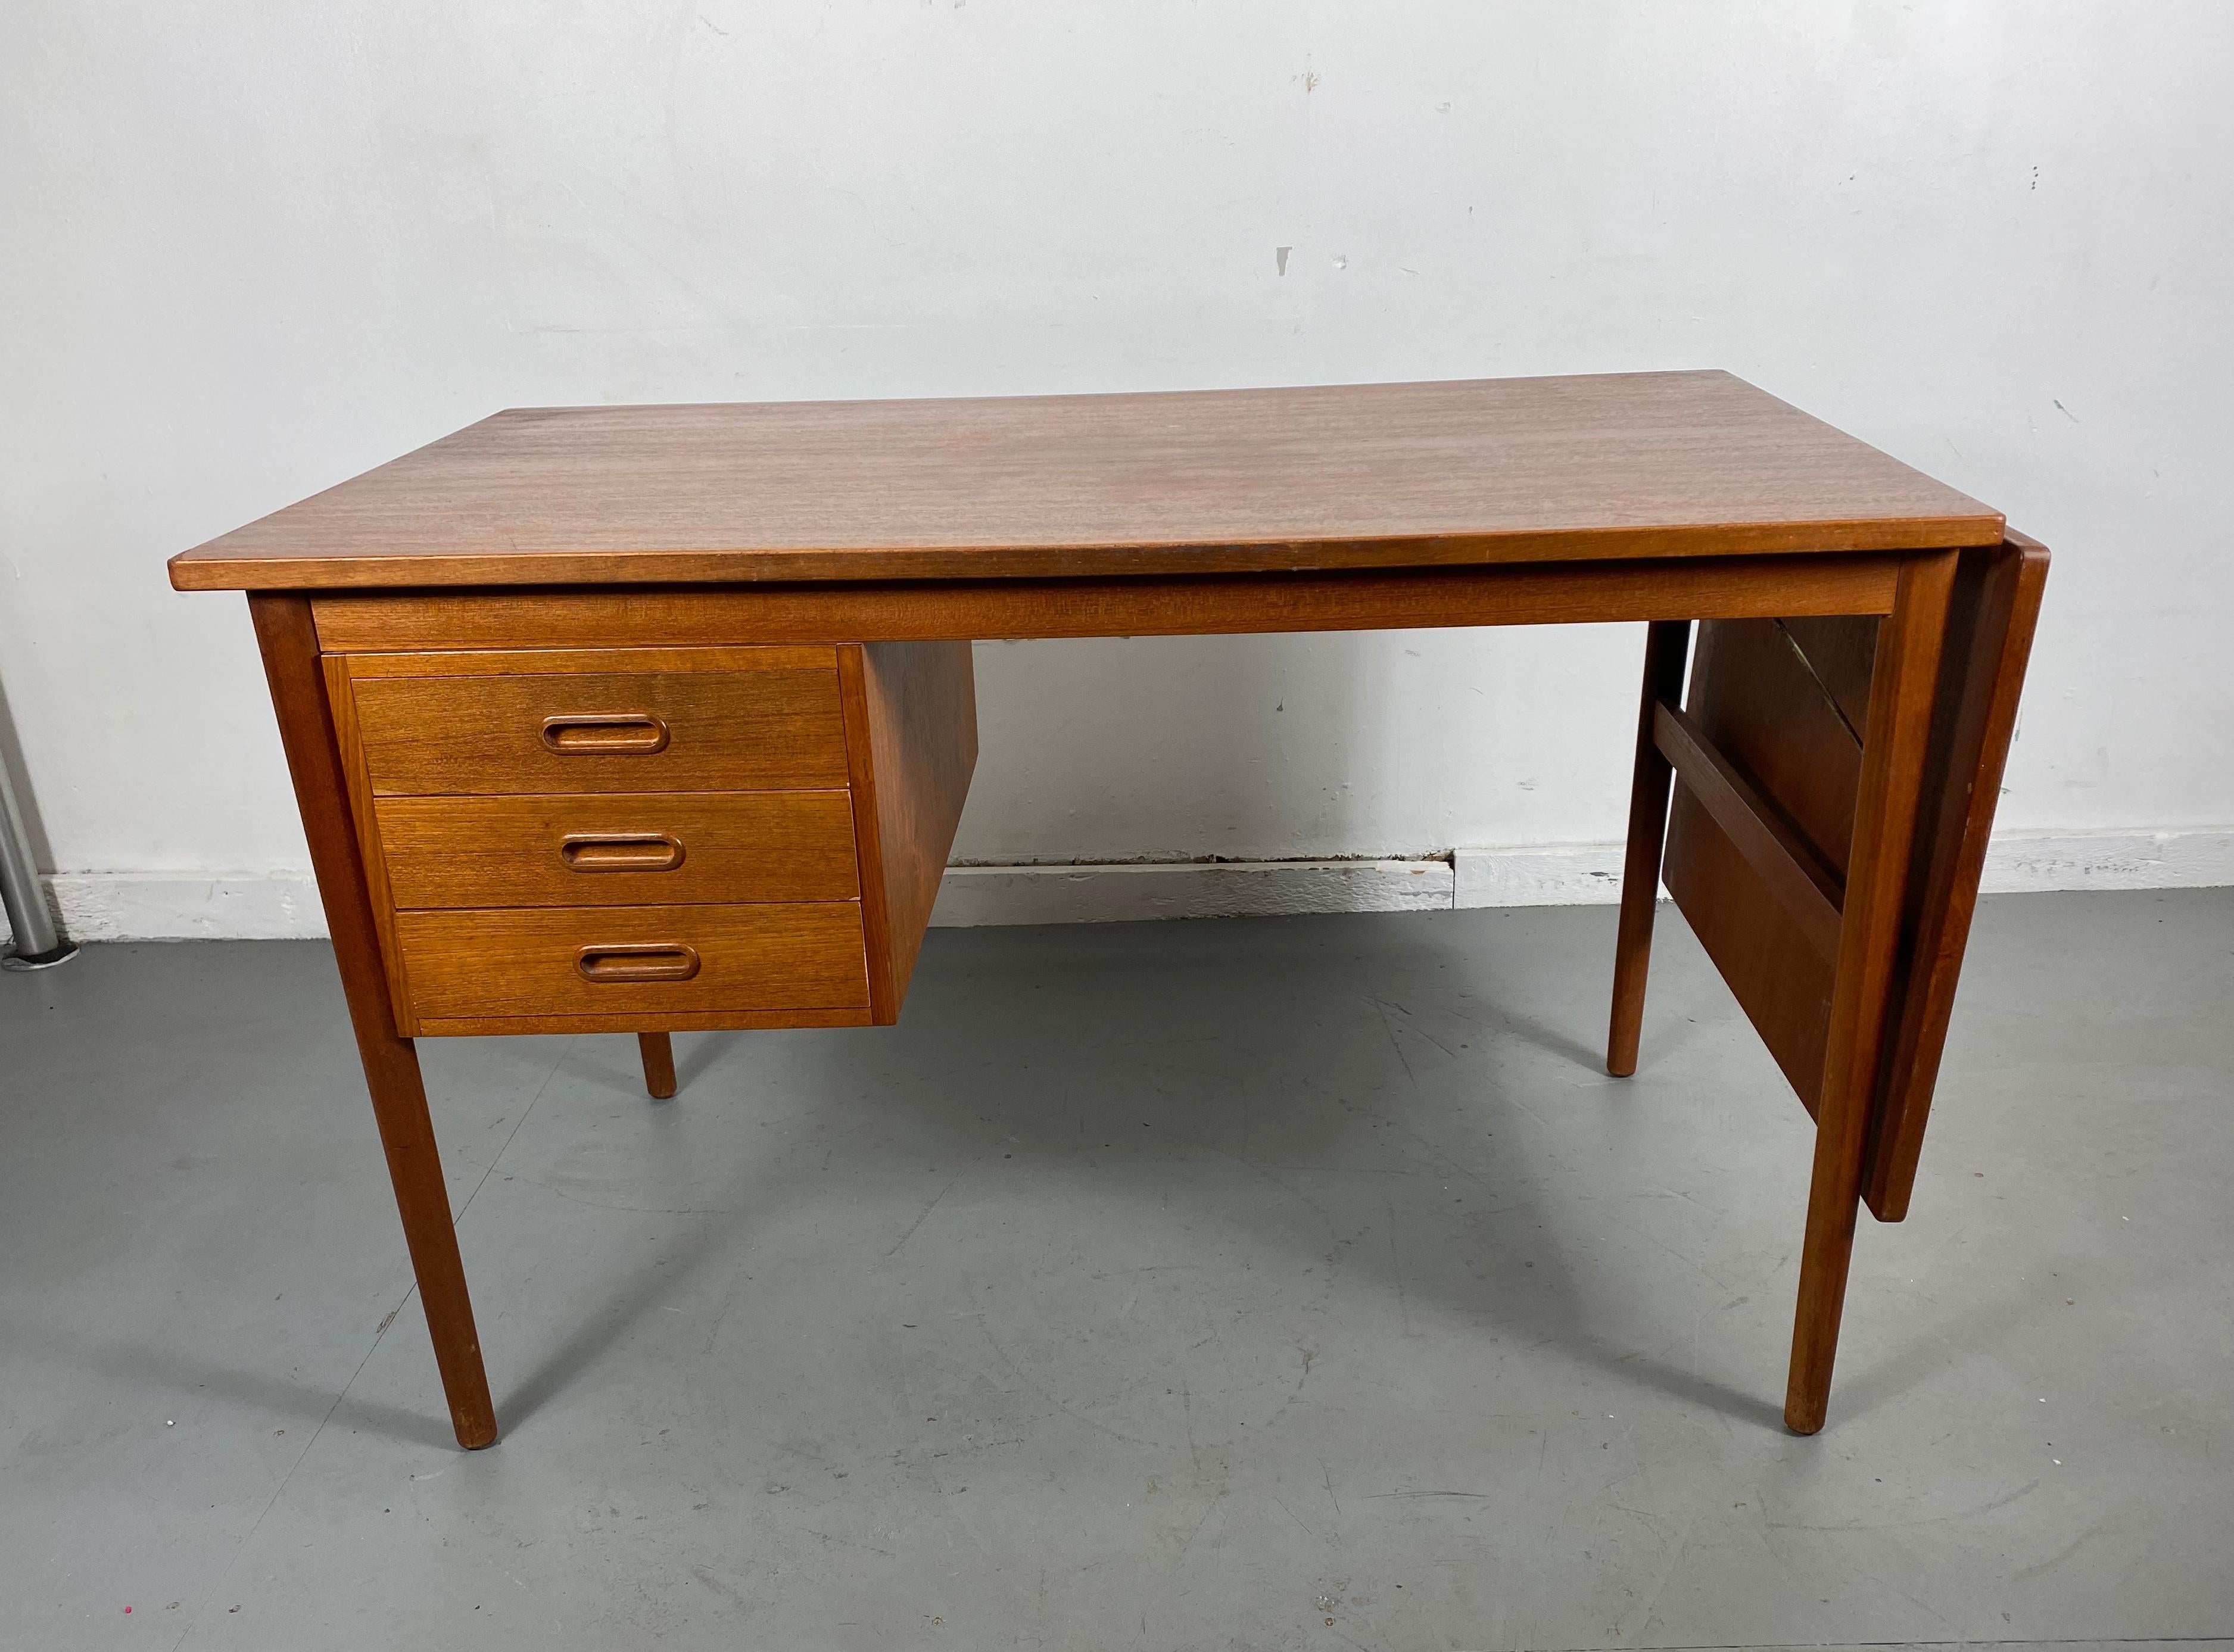 Classic Teak Drop Leaf Desk, Denmark, Attributed to Arne Vodder In Good Condition For Sale In Buffalo, NY